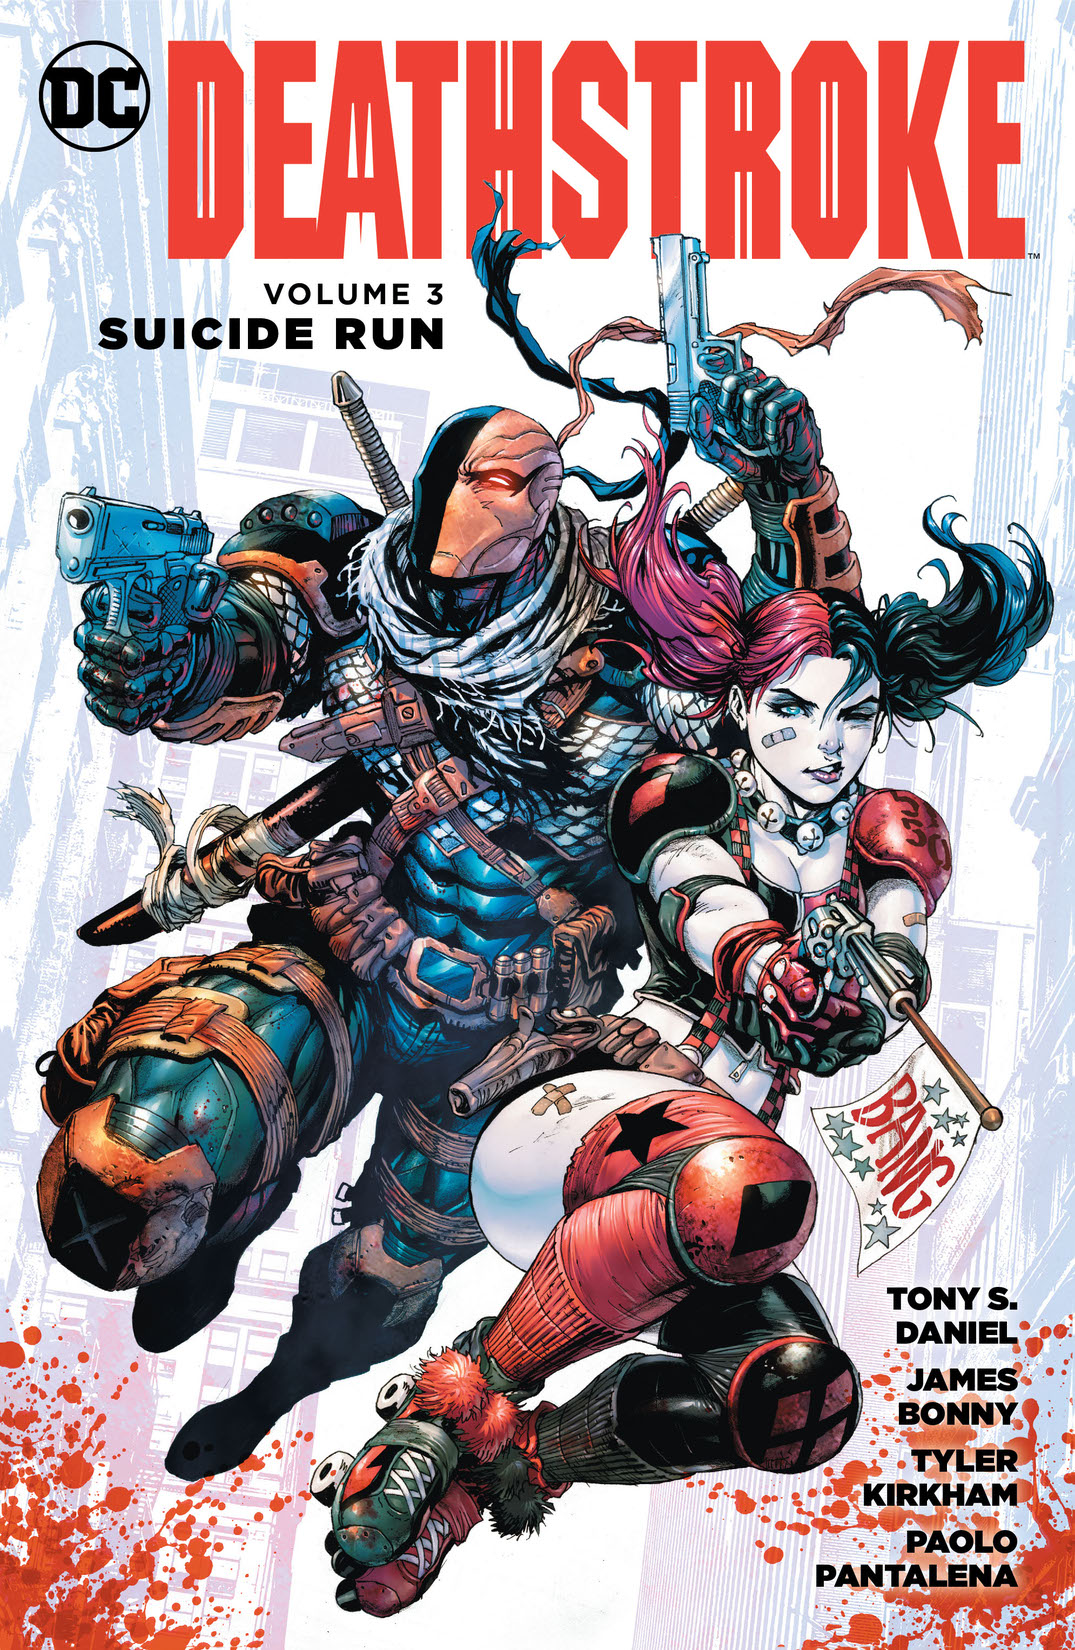 Deathstroke Vol. 3: Suicide Run preview images